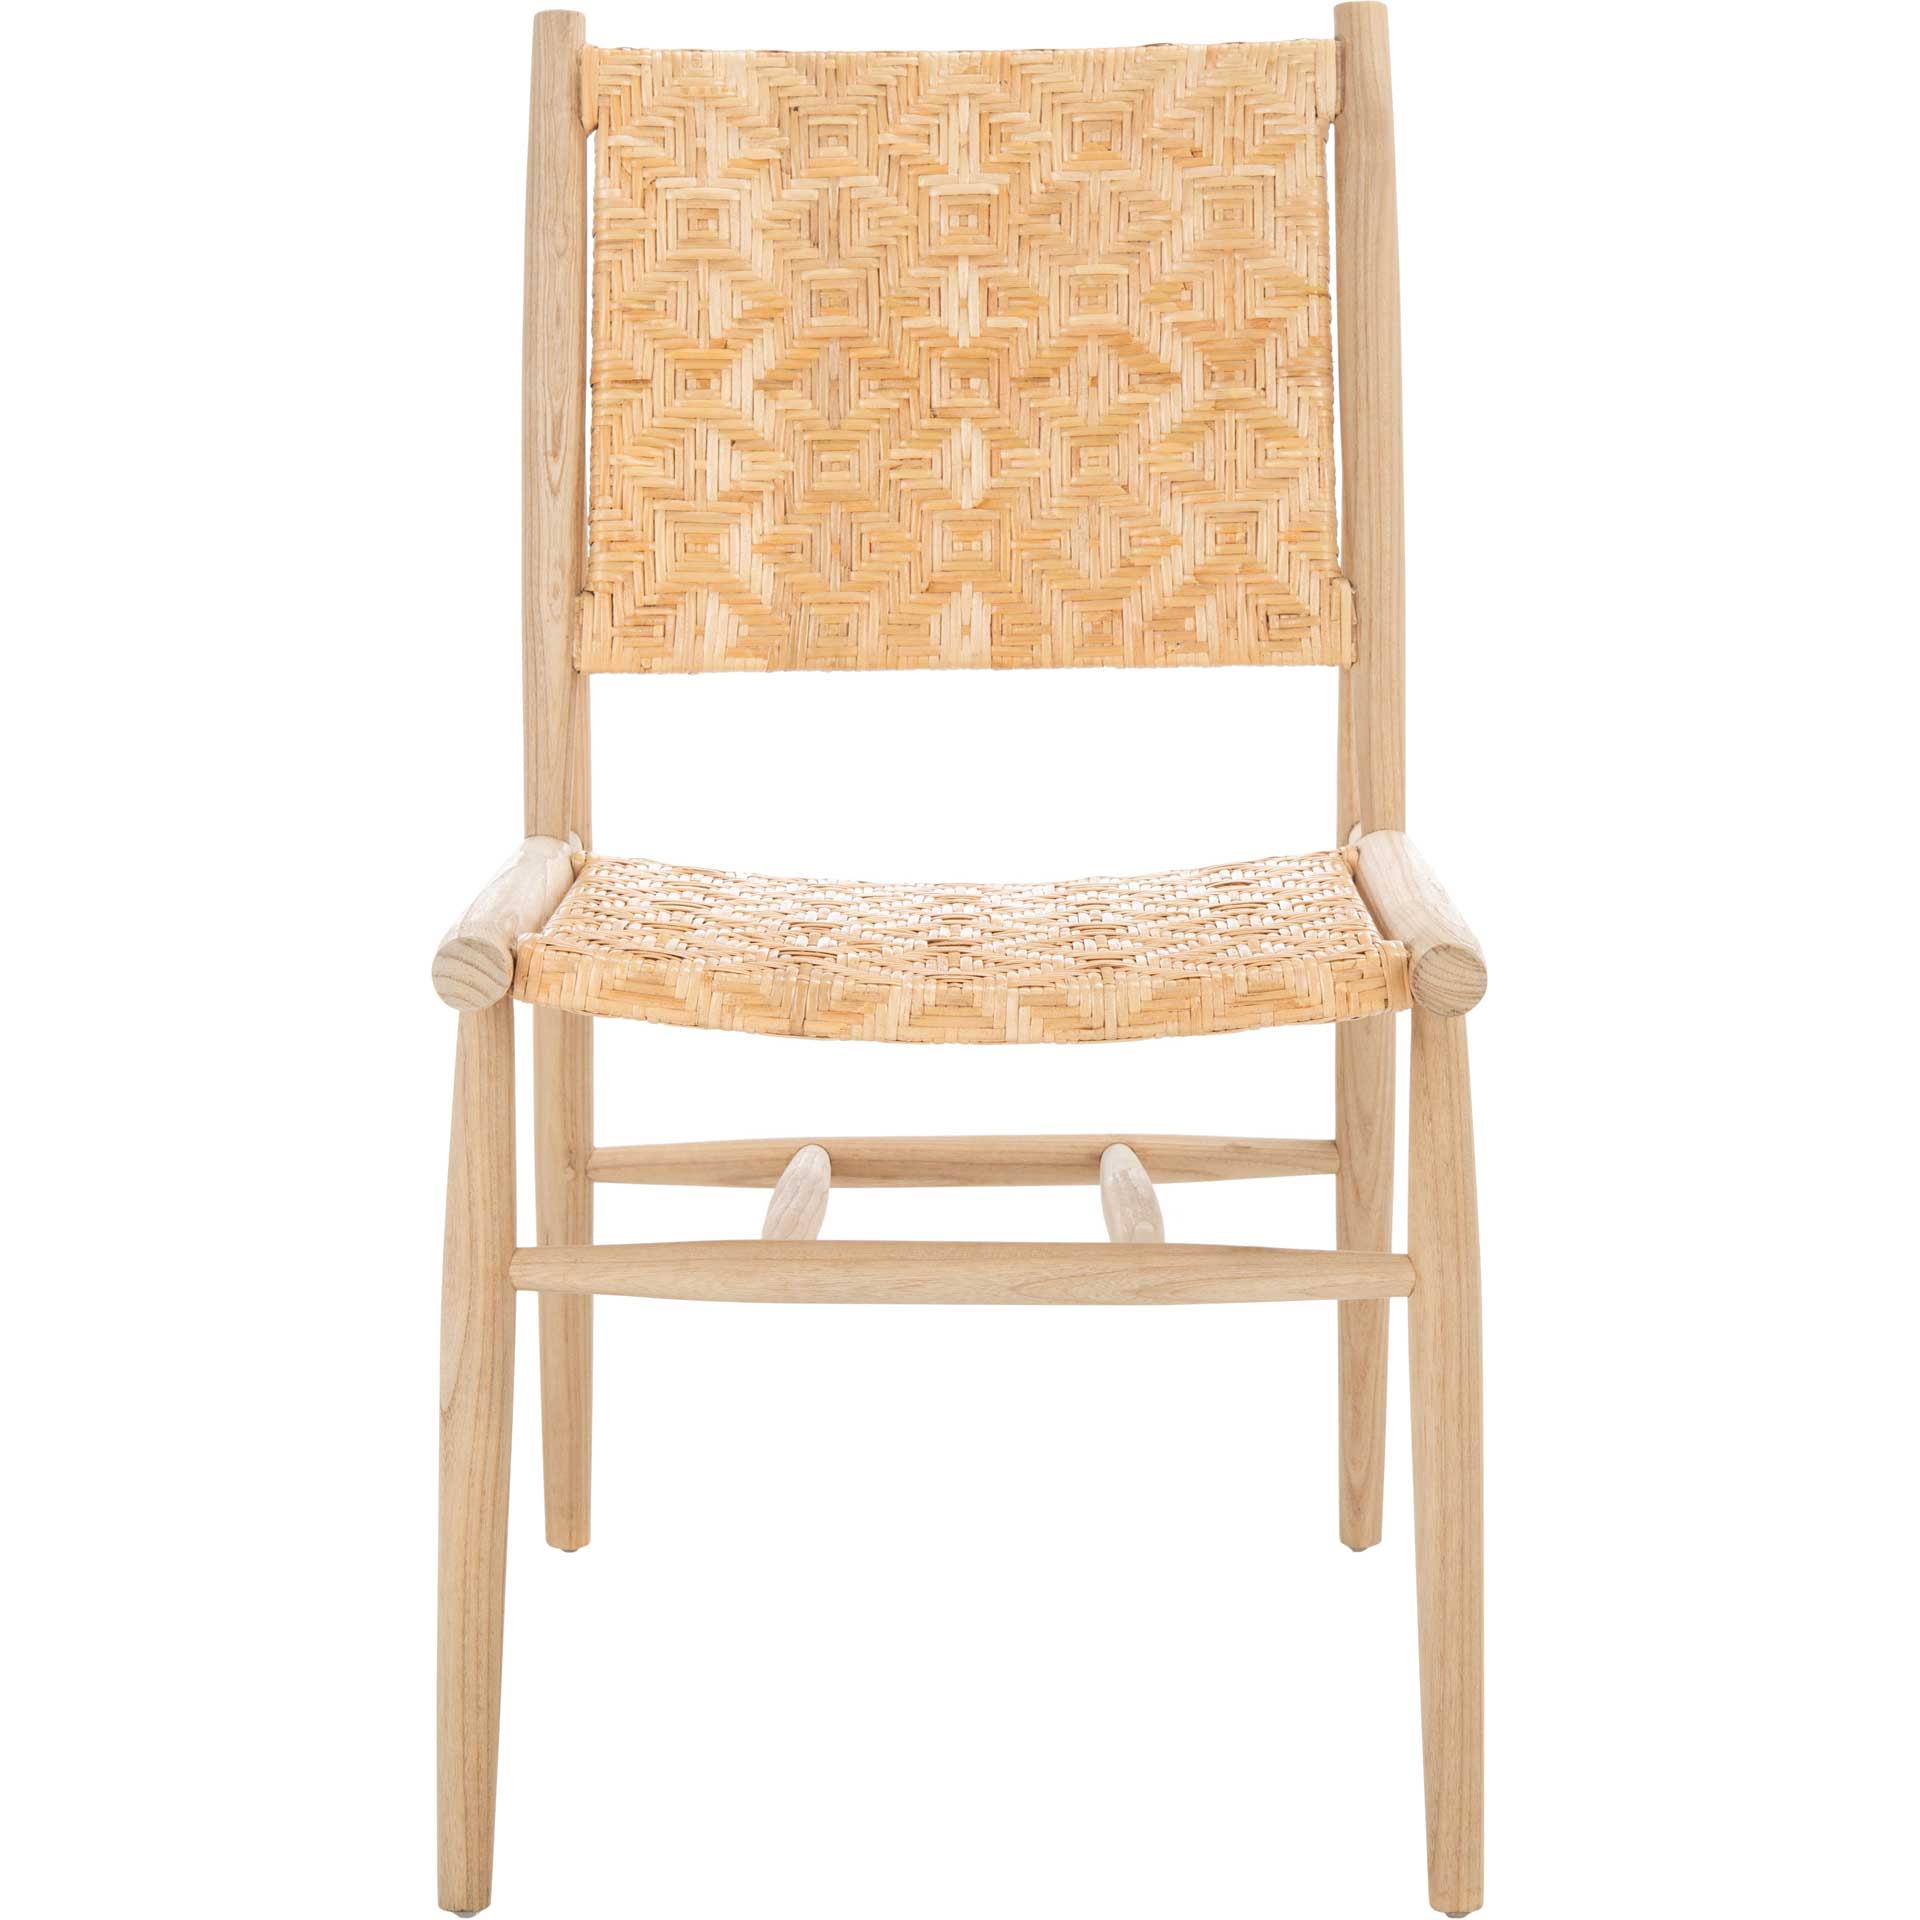 Addison Rattan Dining Chair Natural (Set of 2)